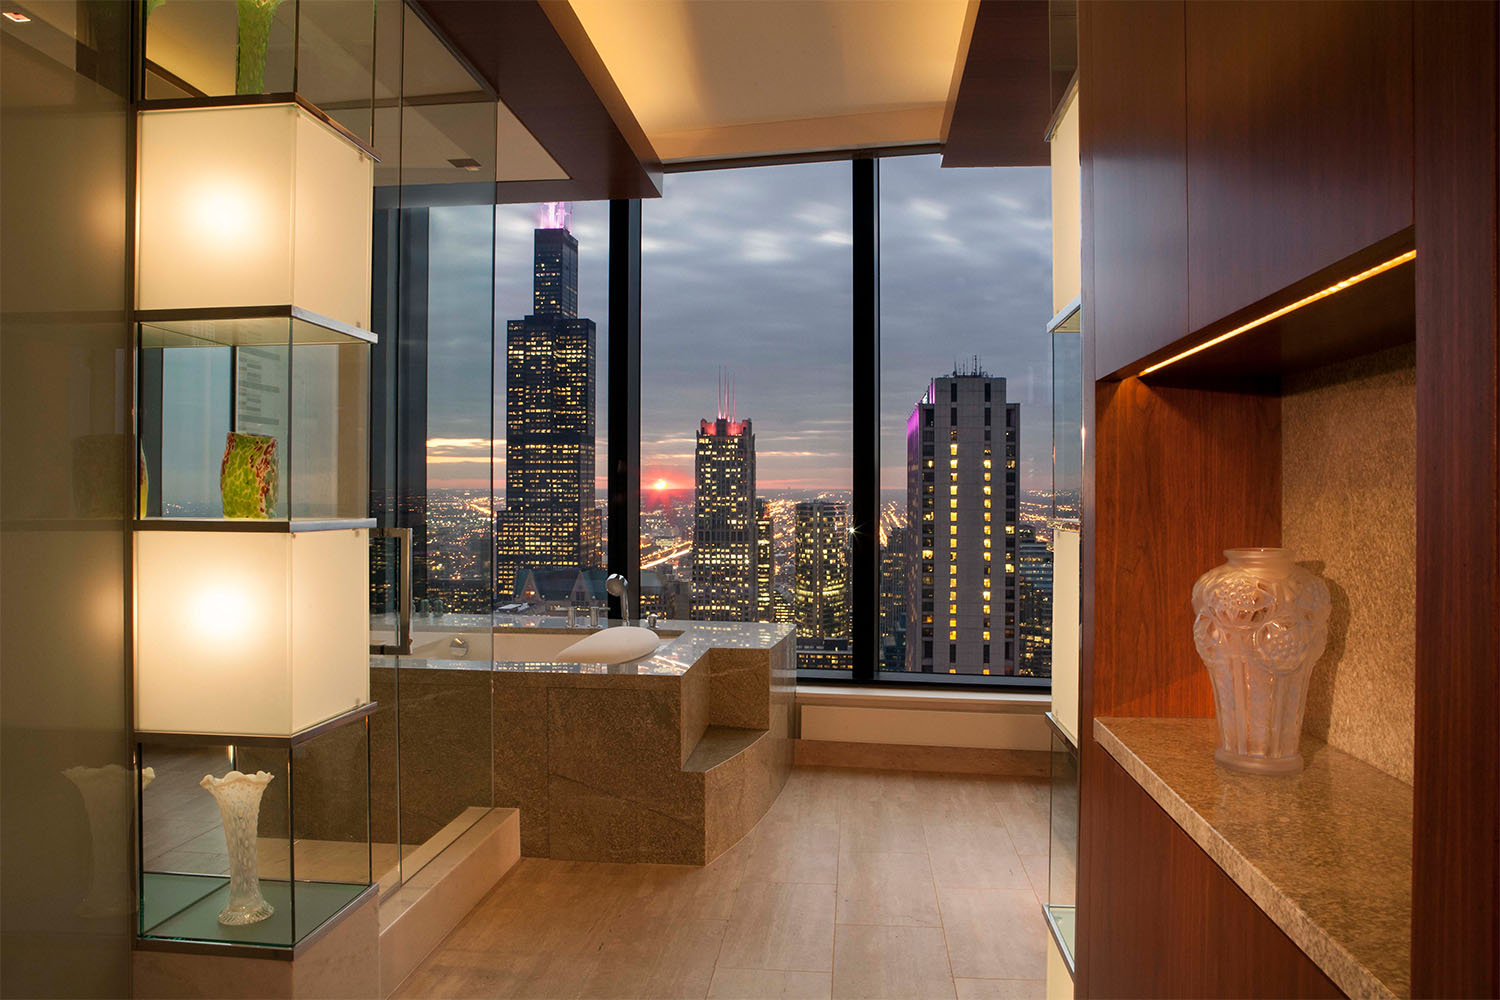 High End Home Contractors Chicago - The Legacy interior with skyline views at dusk